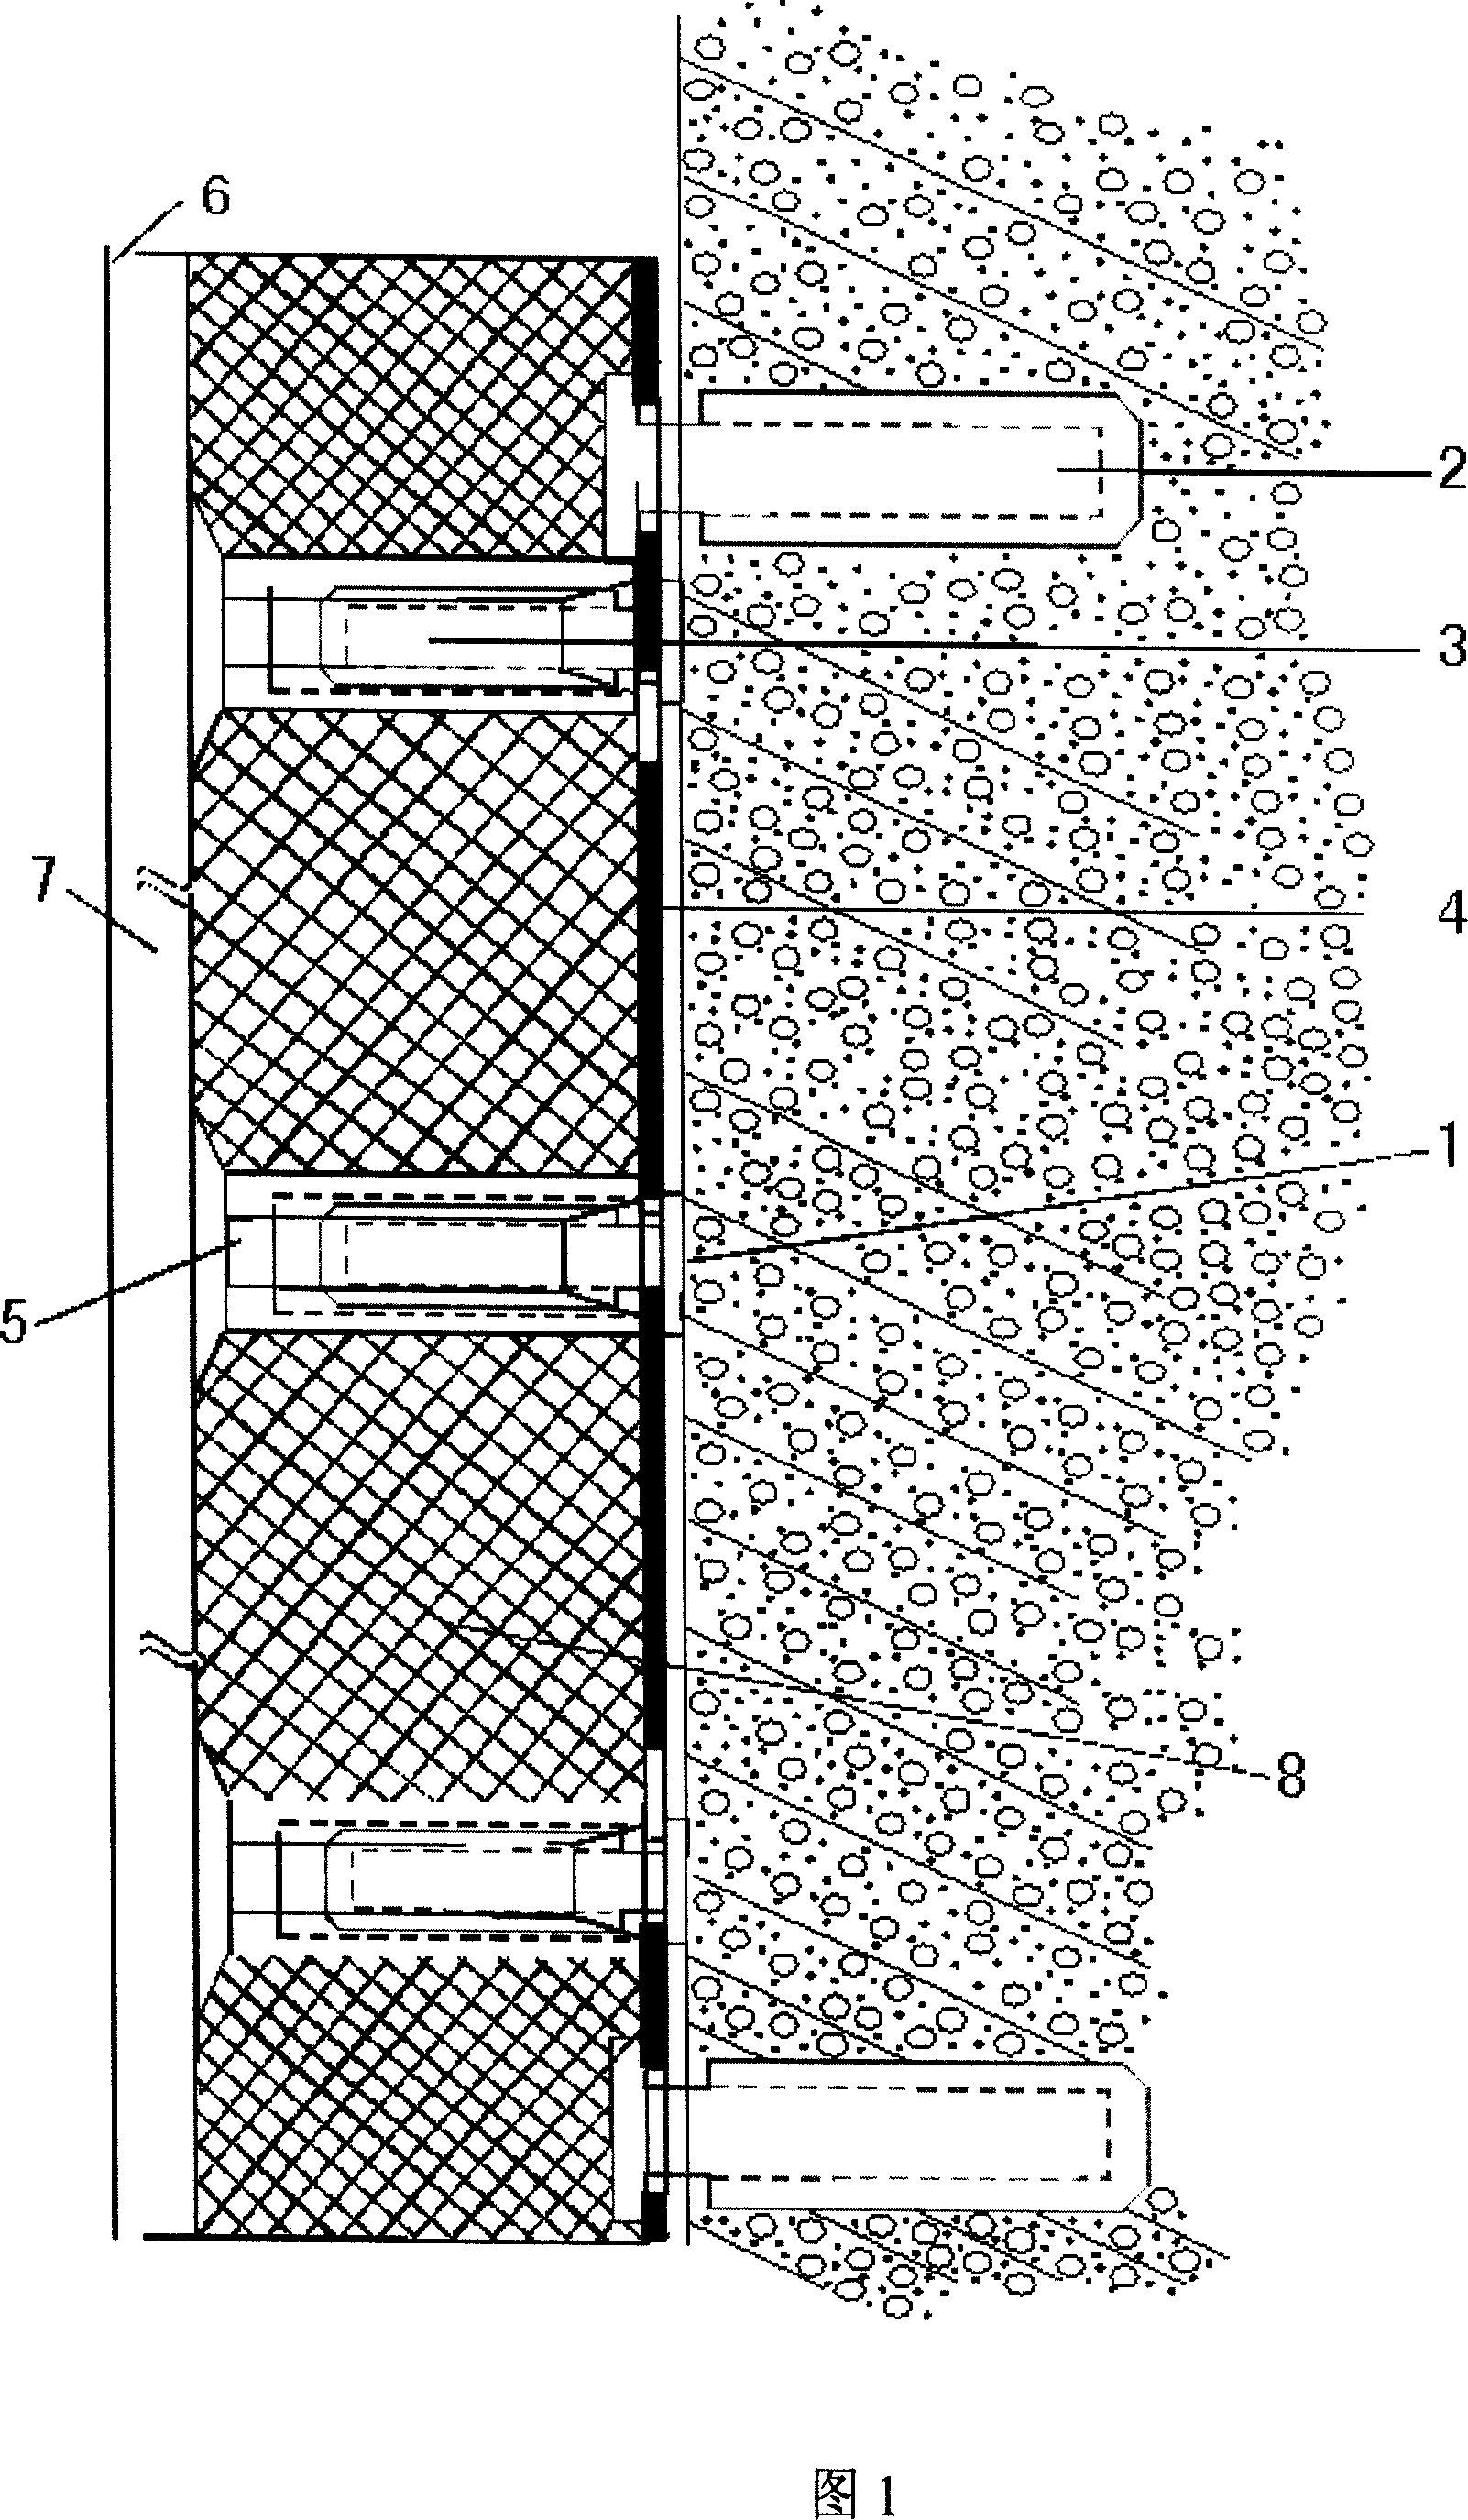 Insulation curtain wall and its construction method